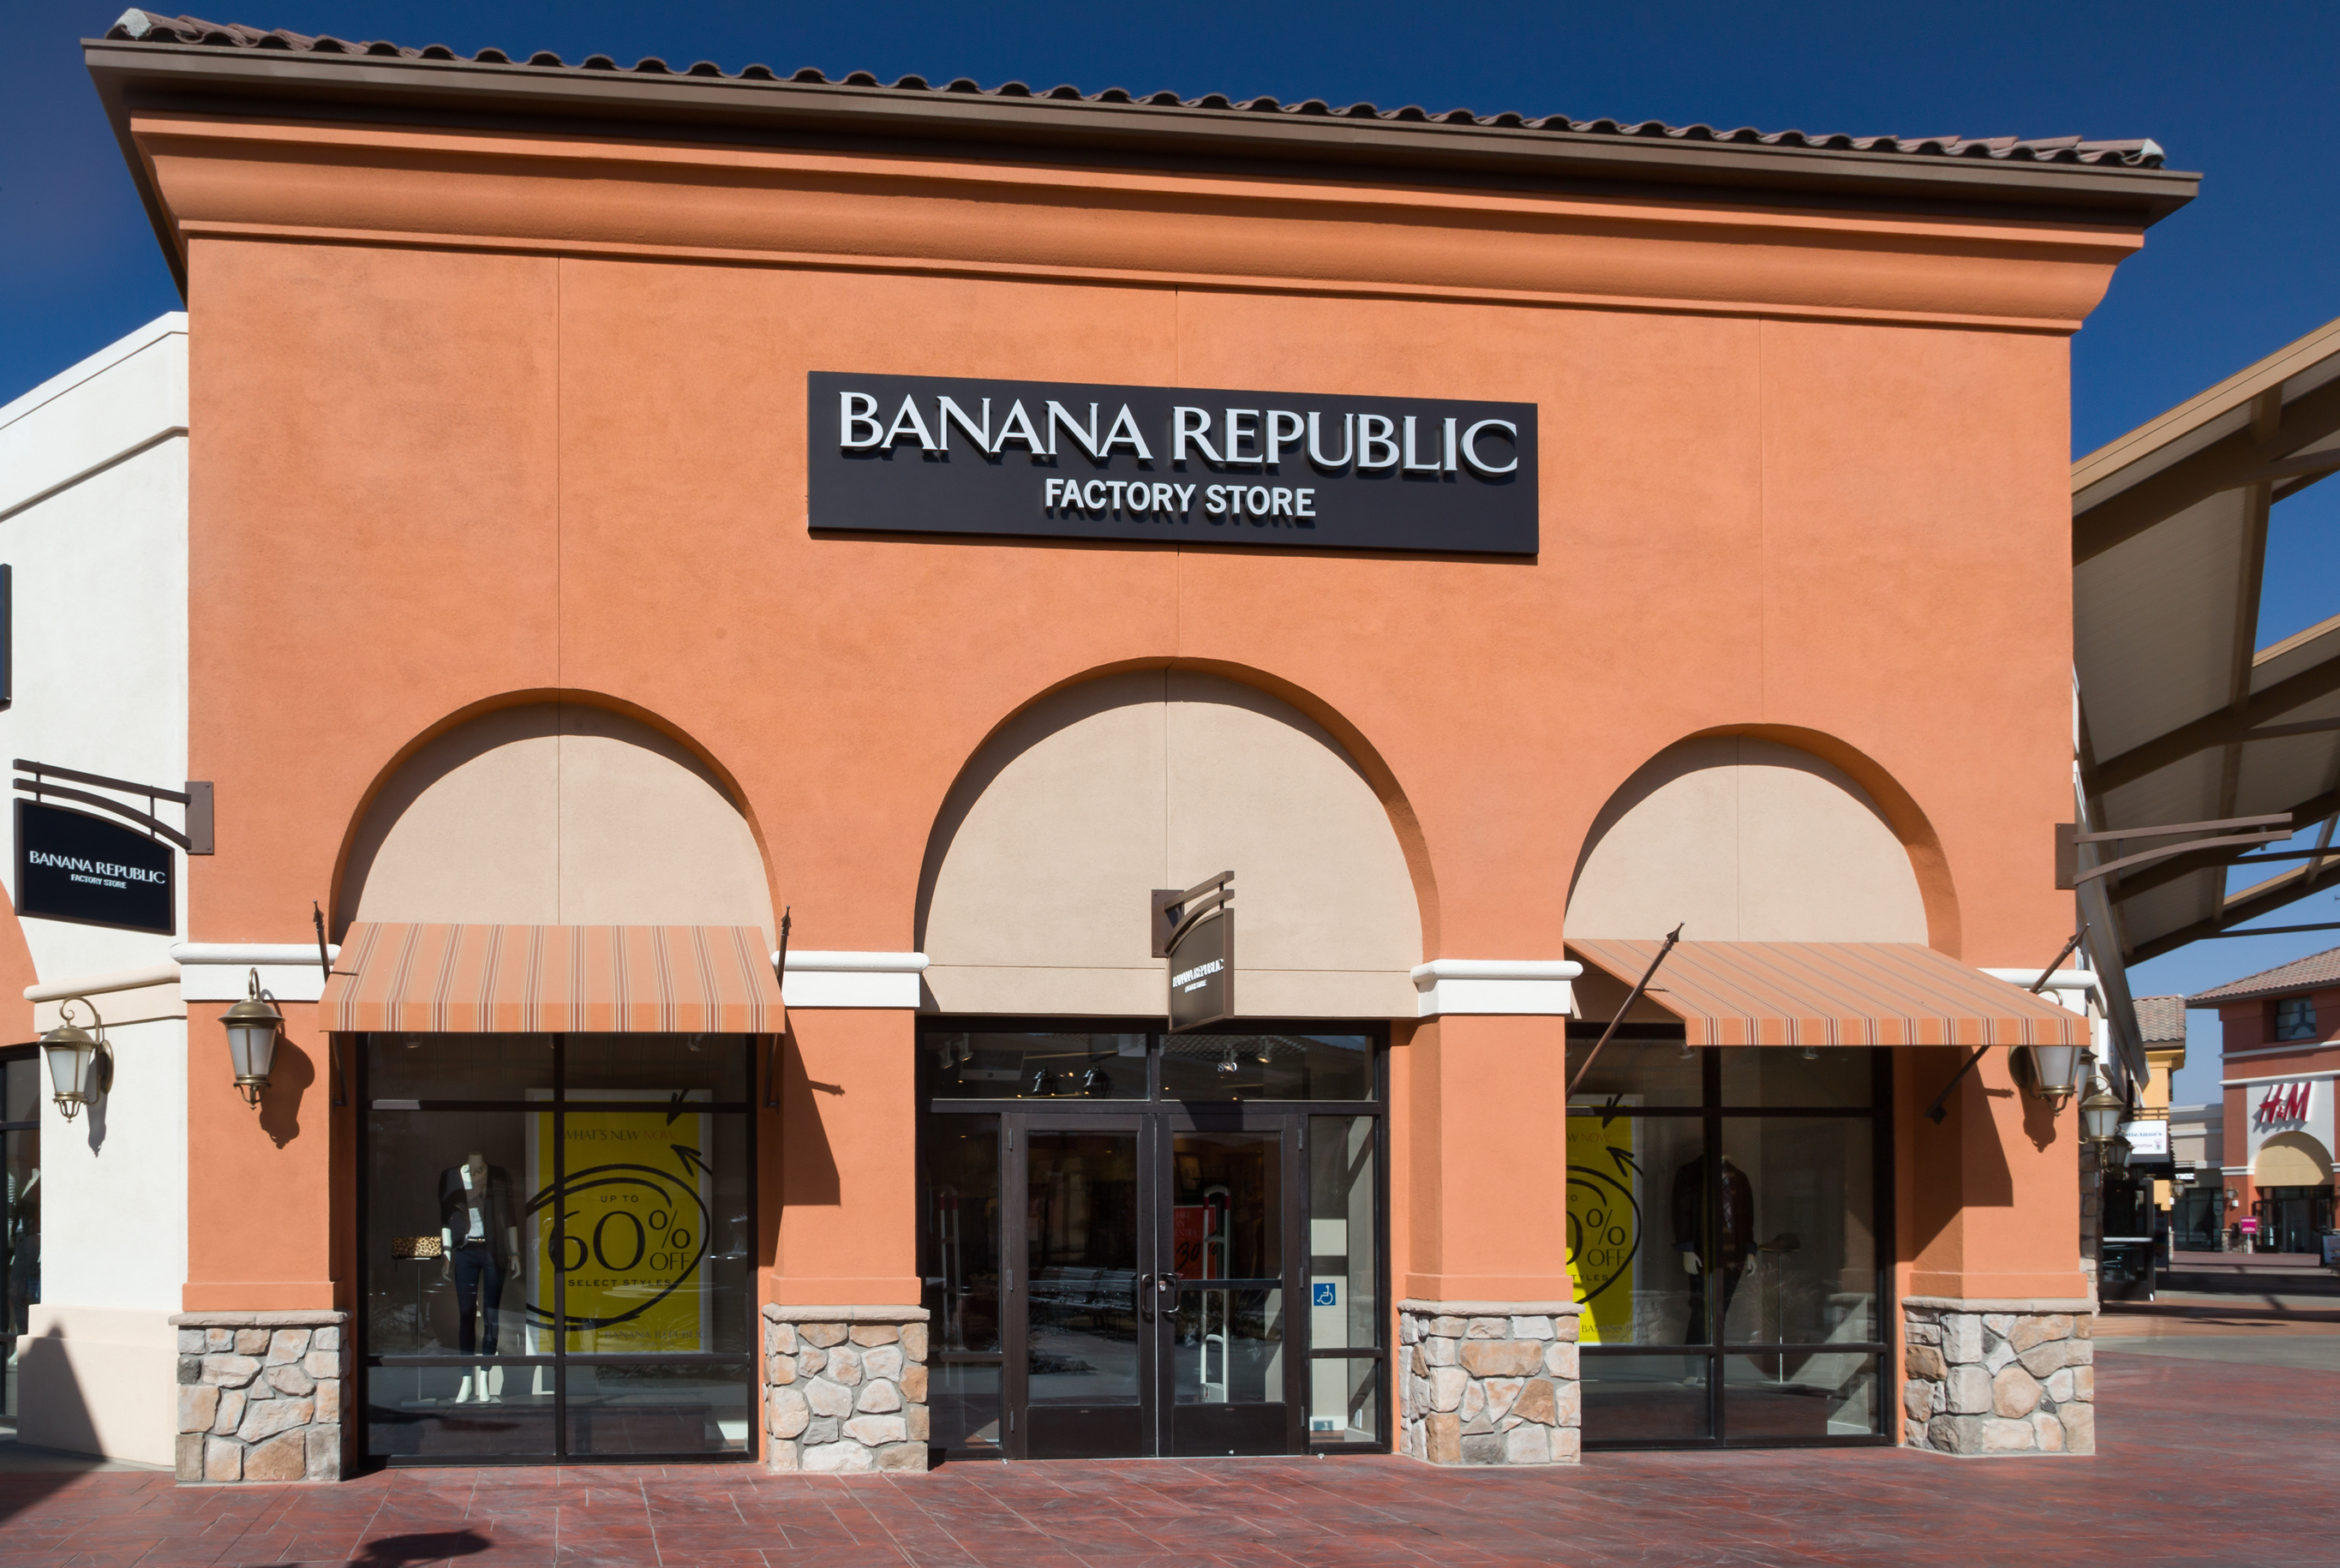 Banana Republic Factory promo code: Save up to 50% sitewide